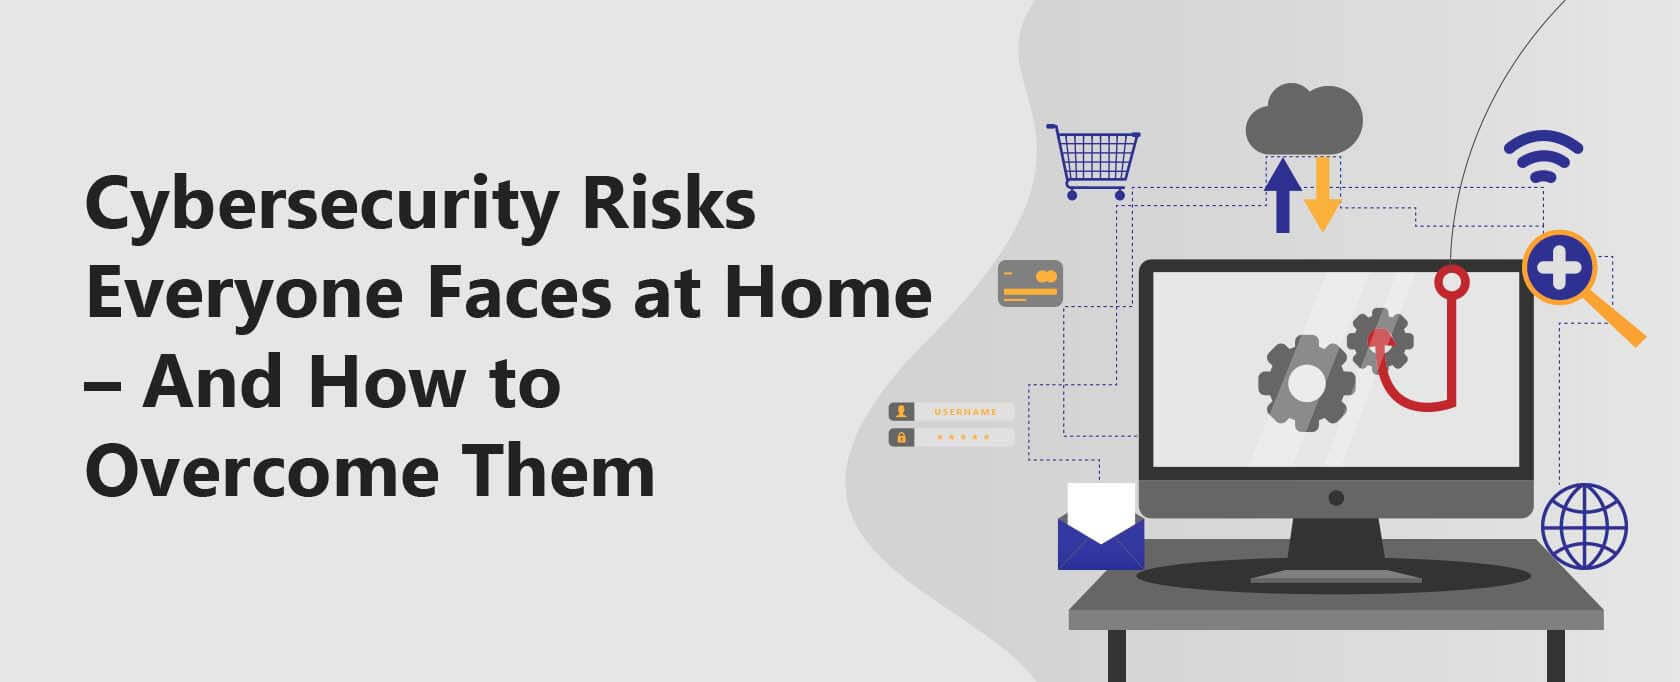 Cybersecurity Risks at Home